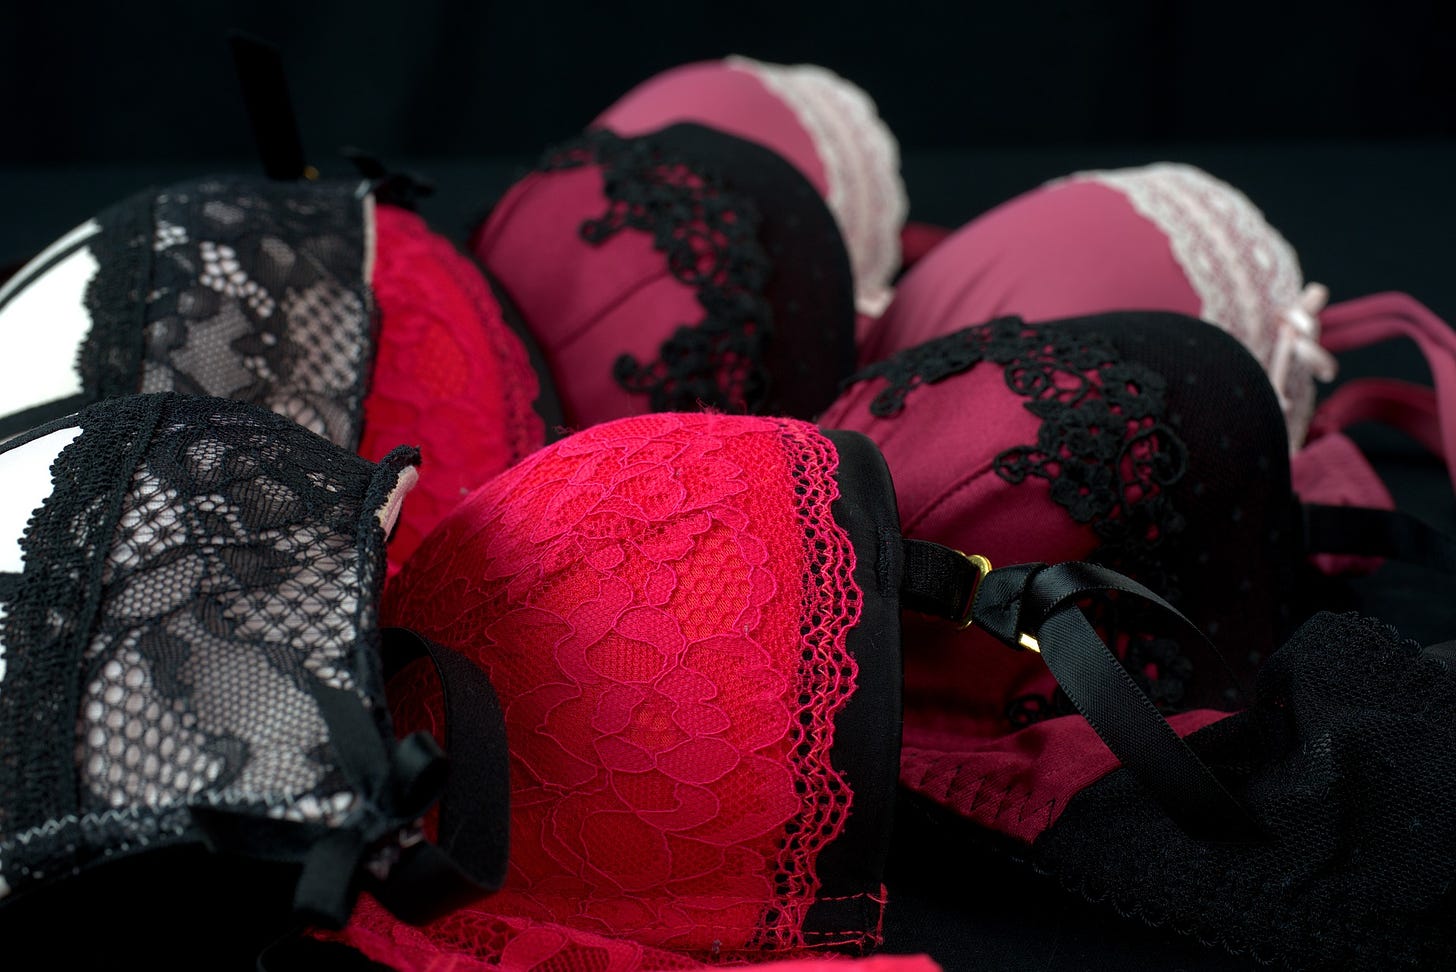 Grouping of colorful bras.